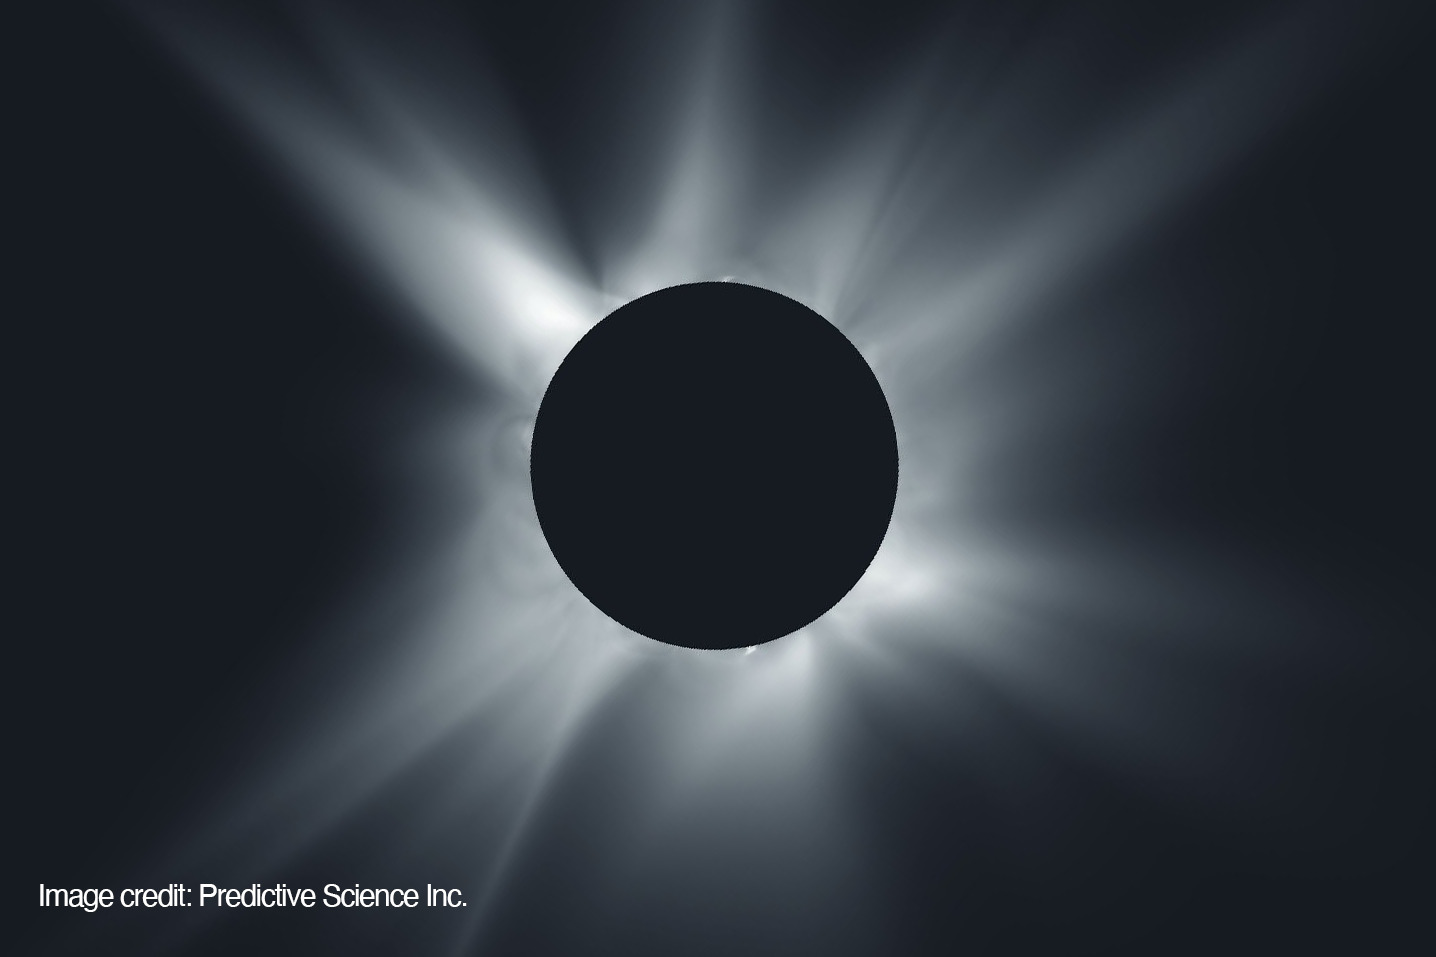 A black disk appears in the middle of the image with long, spiky white rays radiating out from the circle.